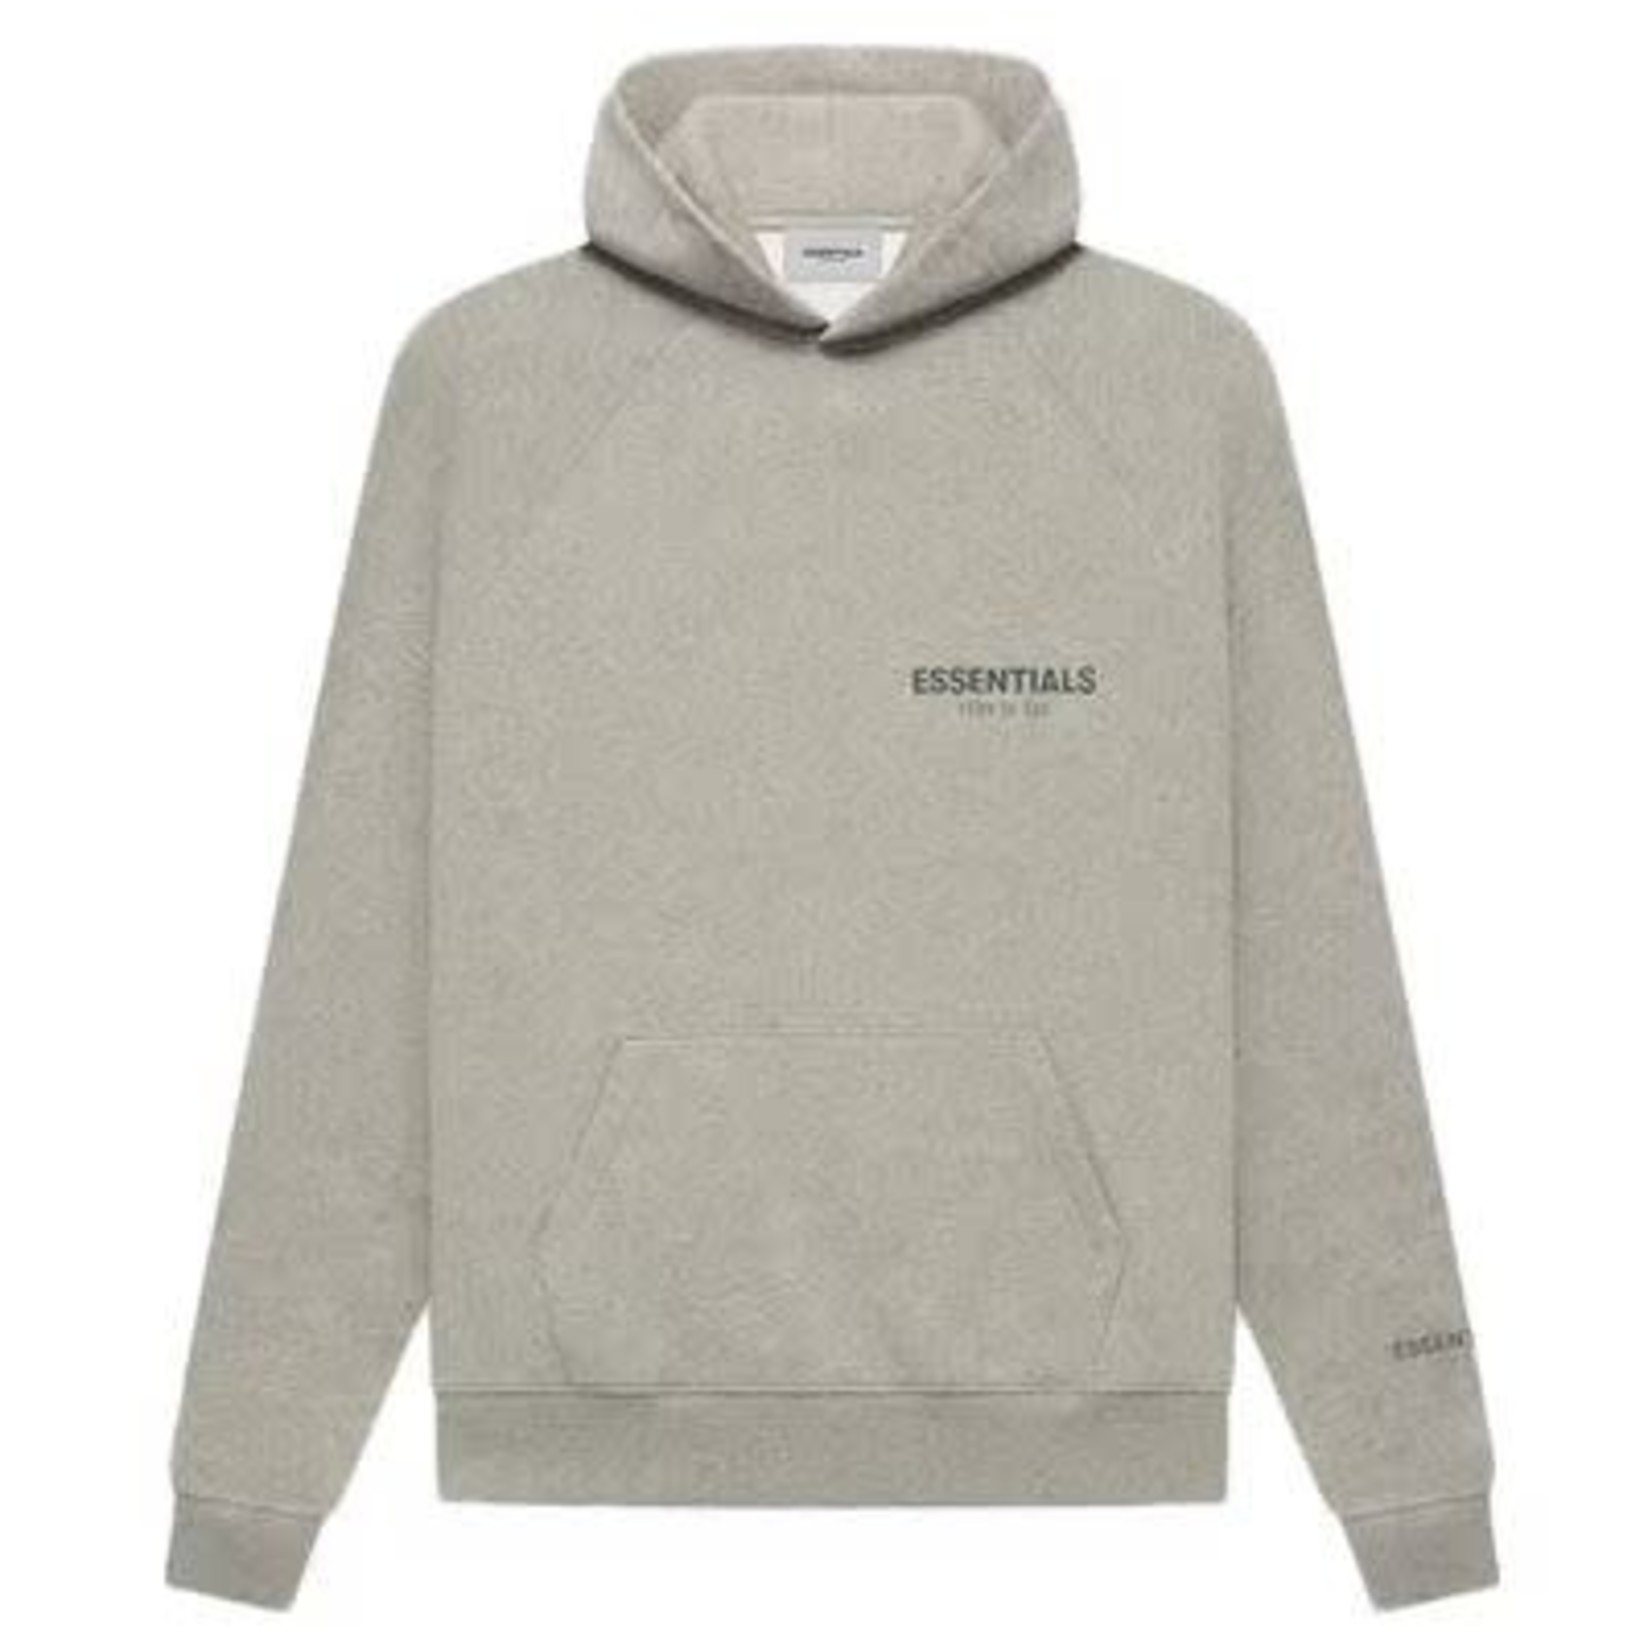 Fear Fear Of God Essentials Core Collection Pullover Hoodie Dark Heather Oatmeal Size L, DS BRAND NEW